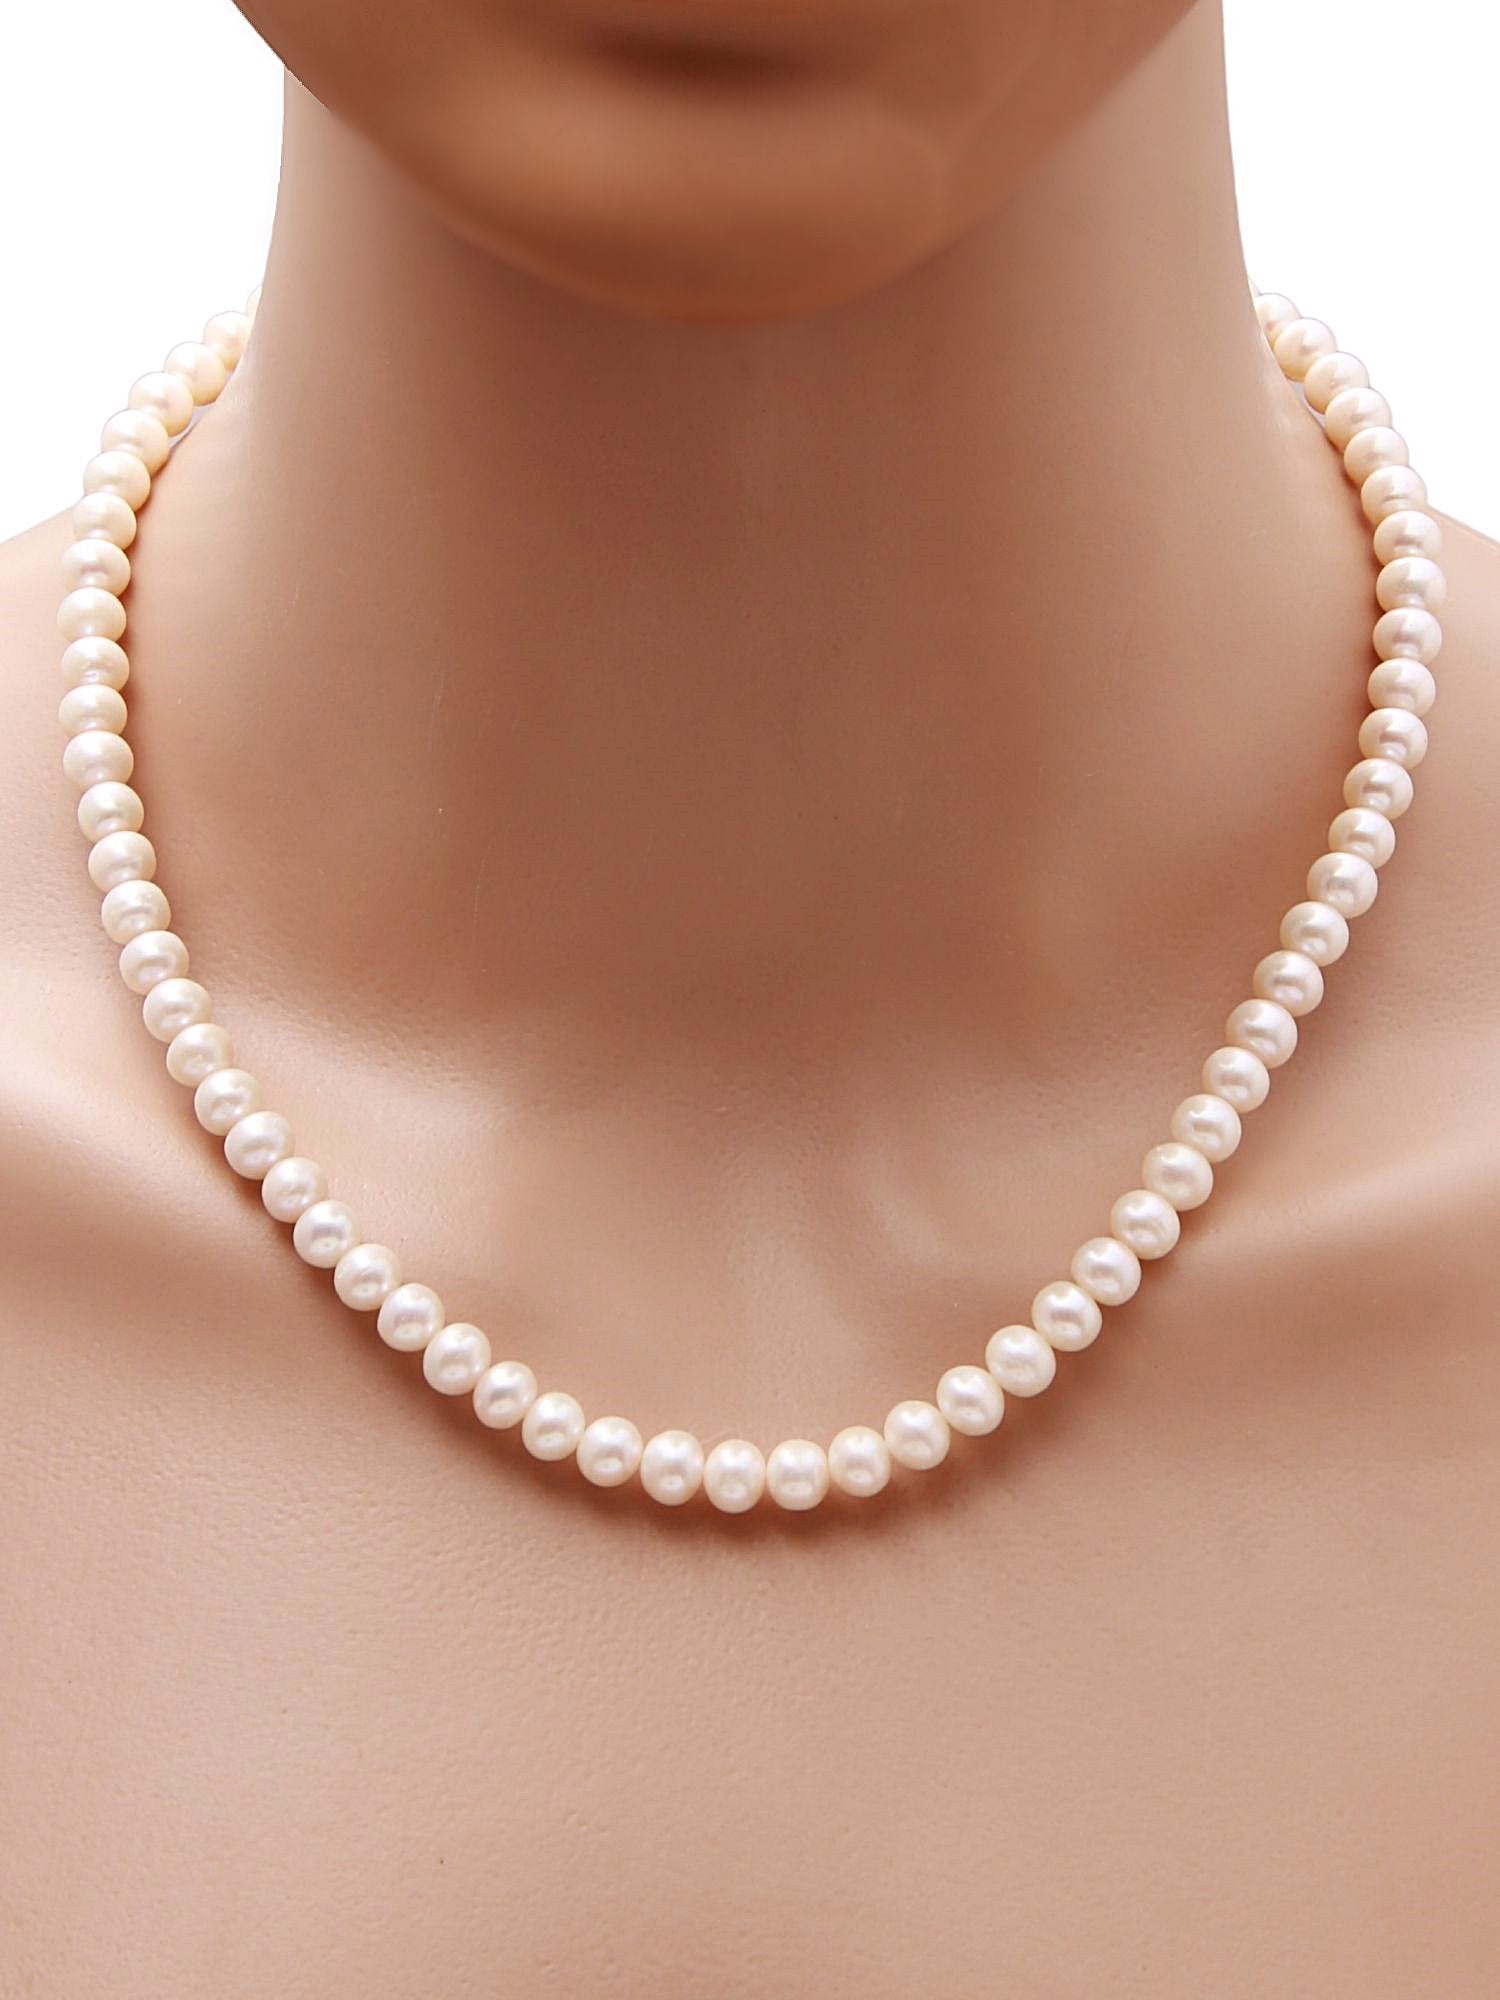 High Luster White Fine Freshwater Pearls Necklace with 92.5 Sterling Silver Clasp,  137 Carats -(F1025)